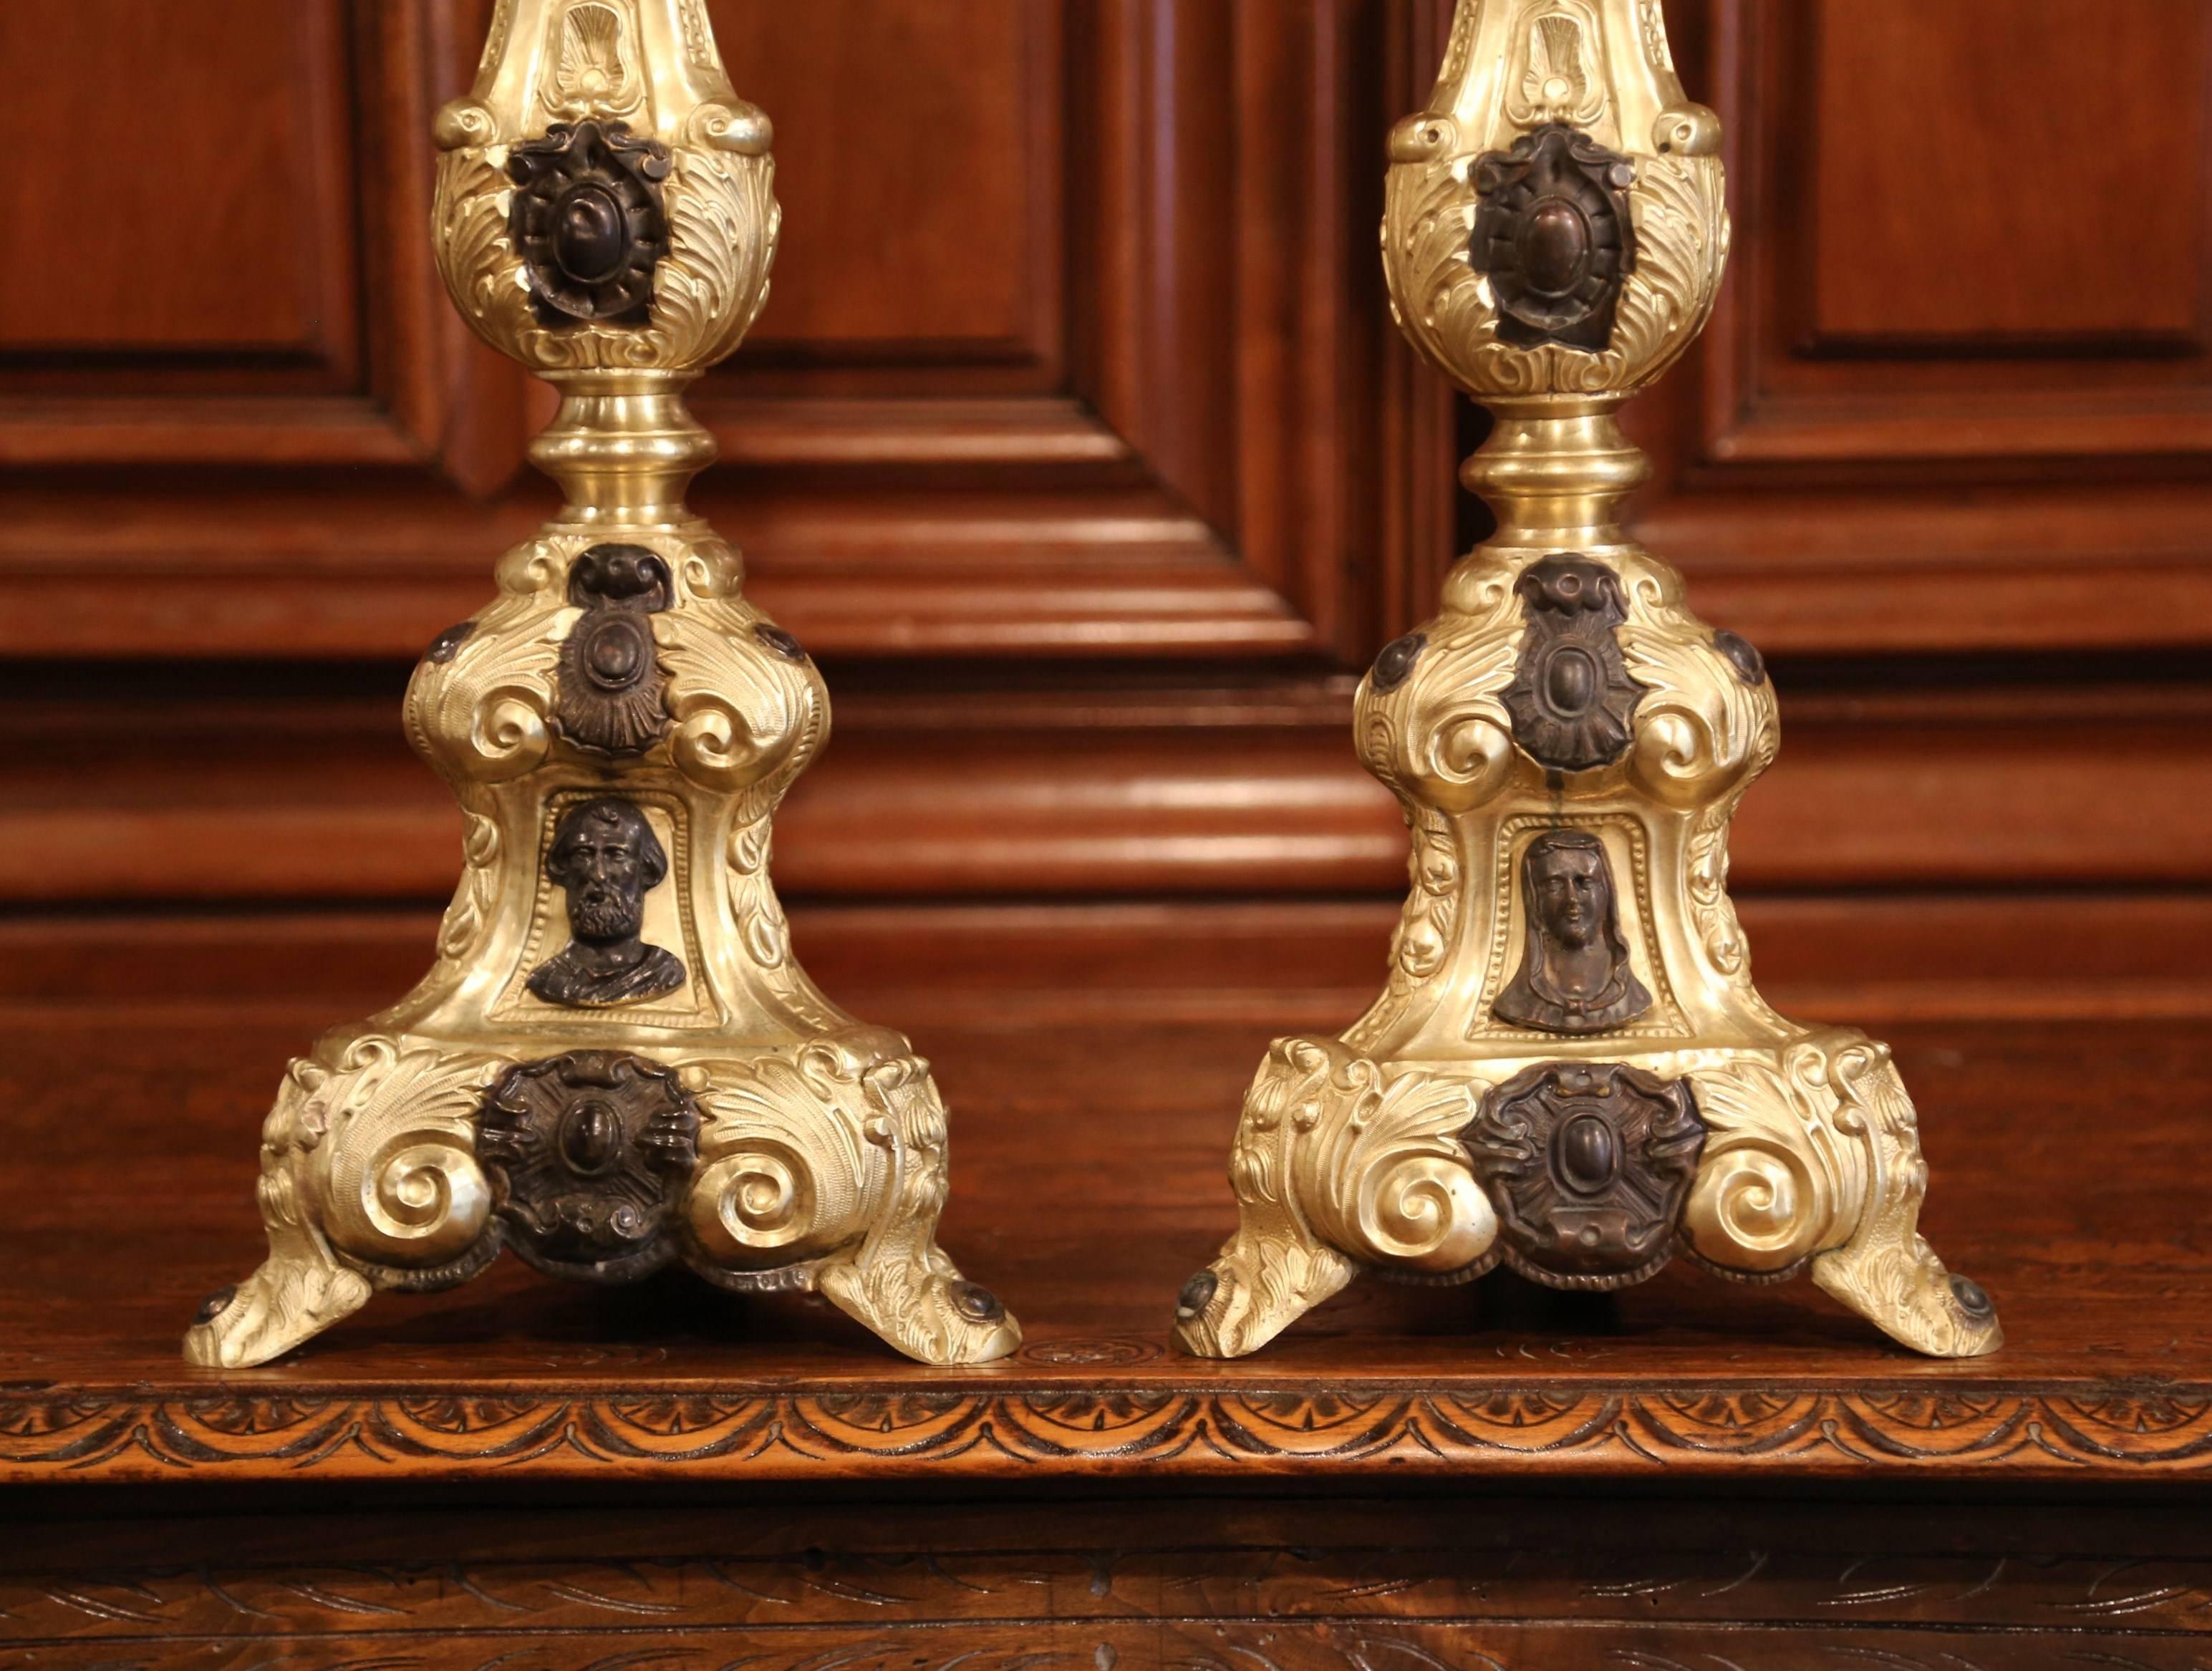 These brass candlesticks were found in a private chapel near Lyon, France; crafted circa 1860, each pricket sits on three small curved feet with three sides embellished by repousse decor. Each tall candle holders has three medallions representing